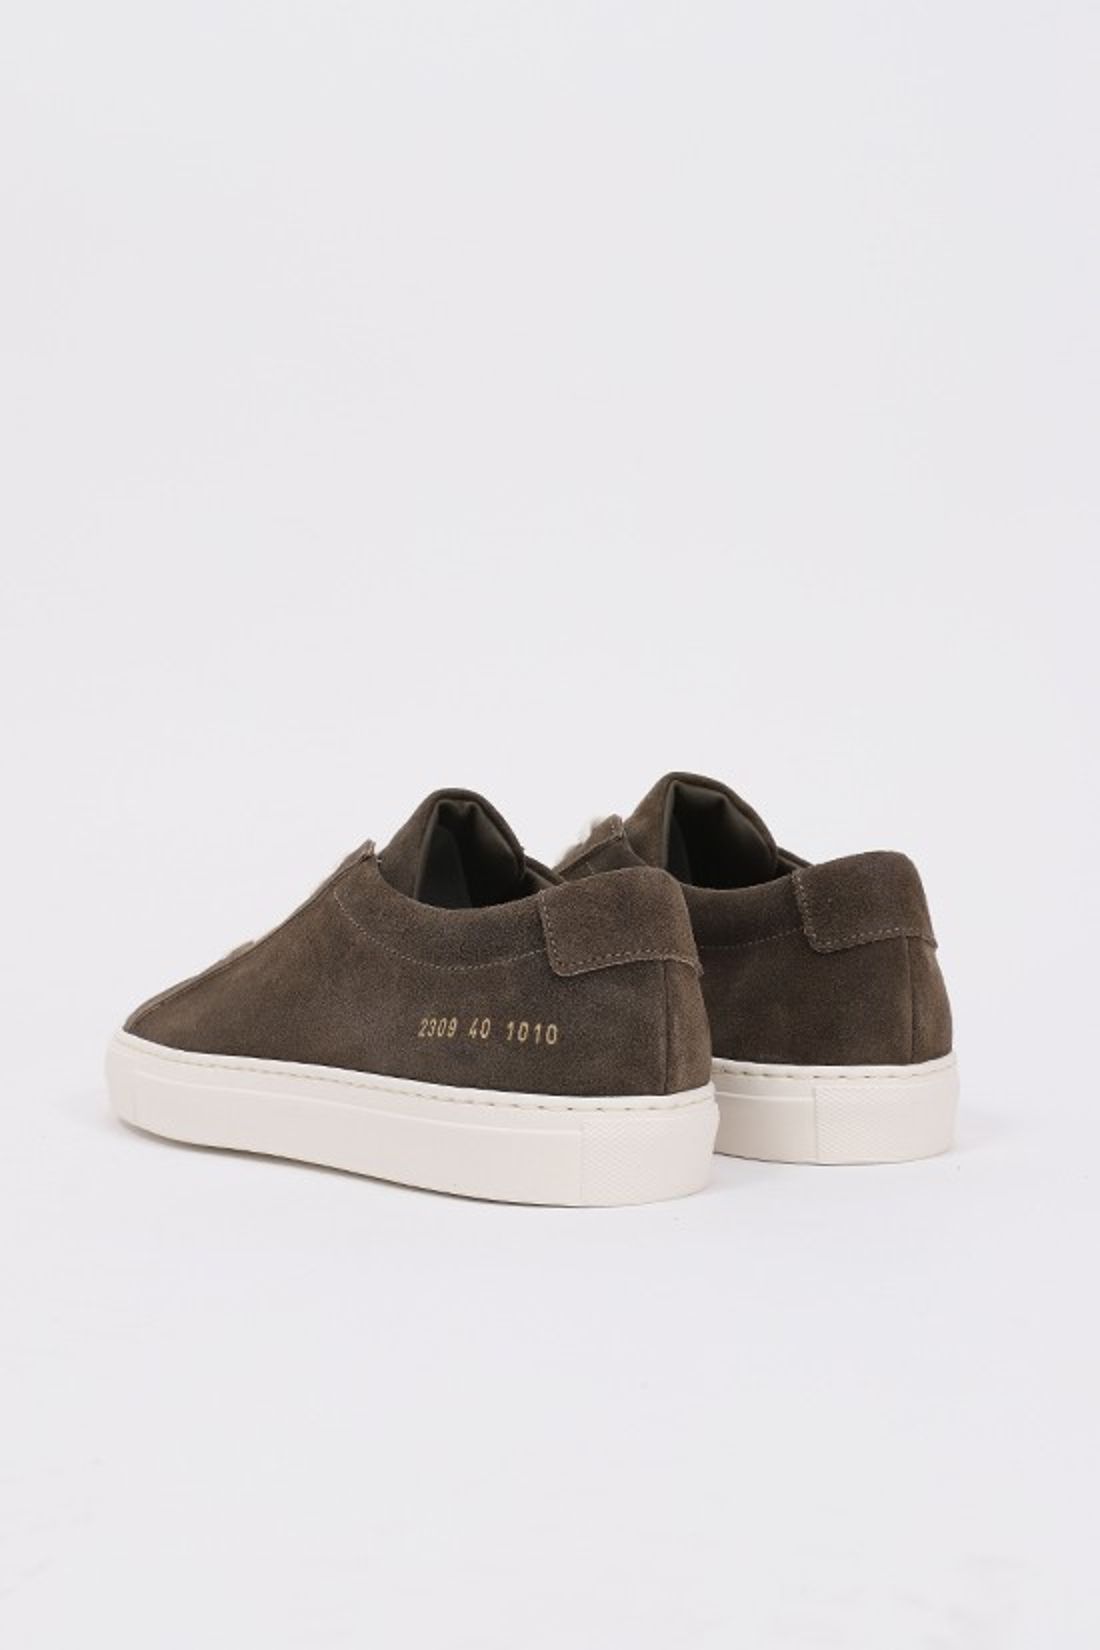 COMMON PROJECTS / Achilles low waxed suede 2309 Olive 1010